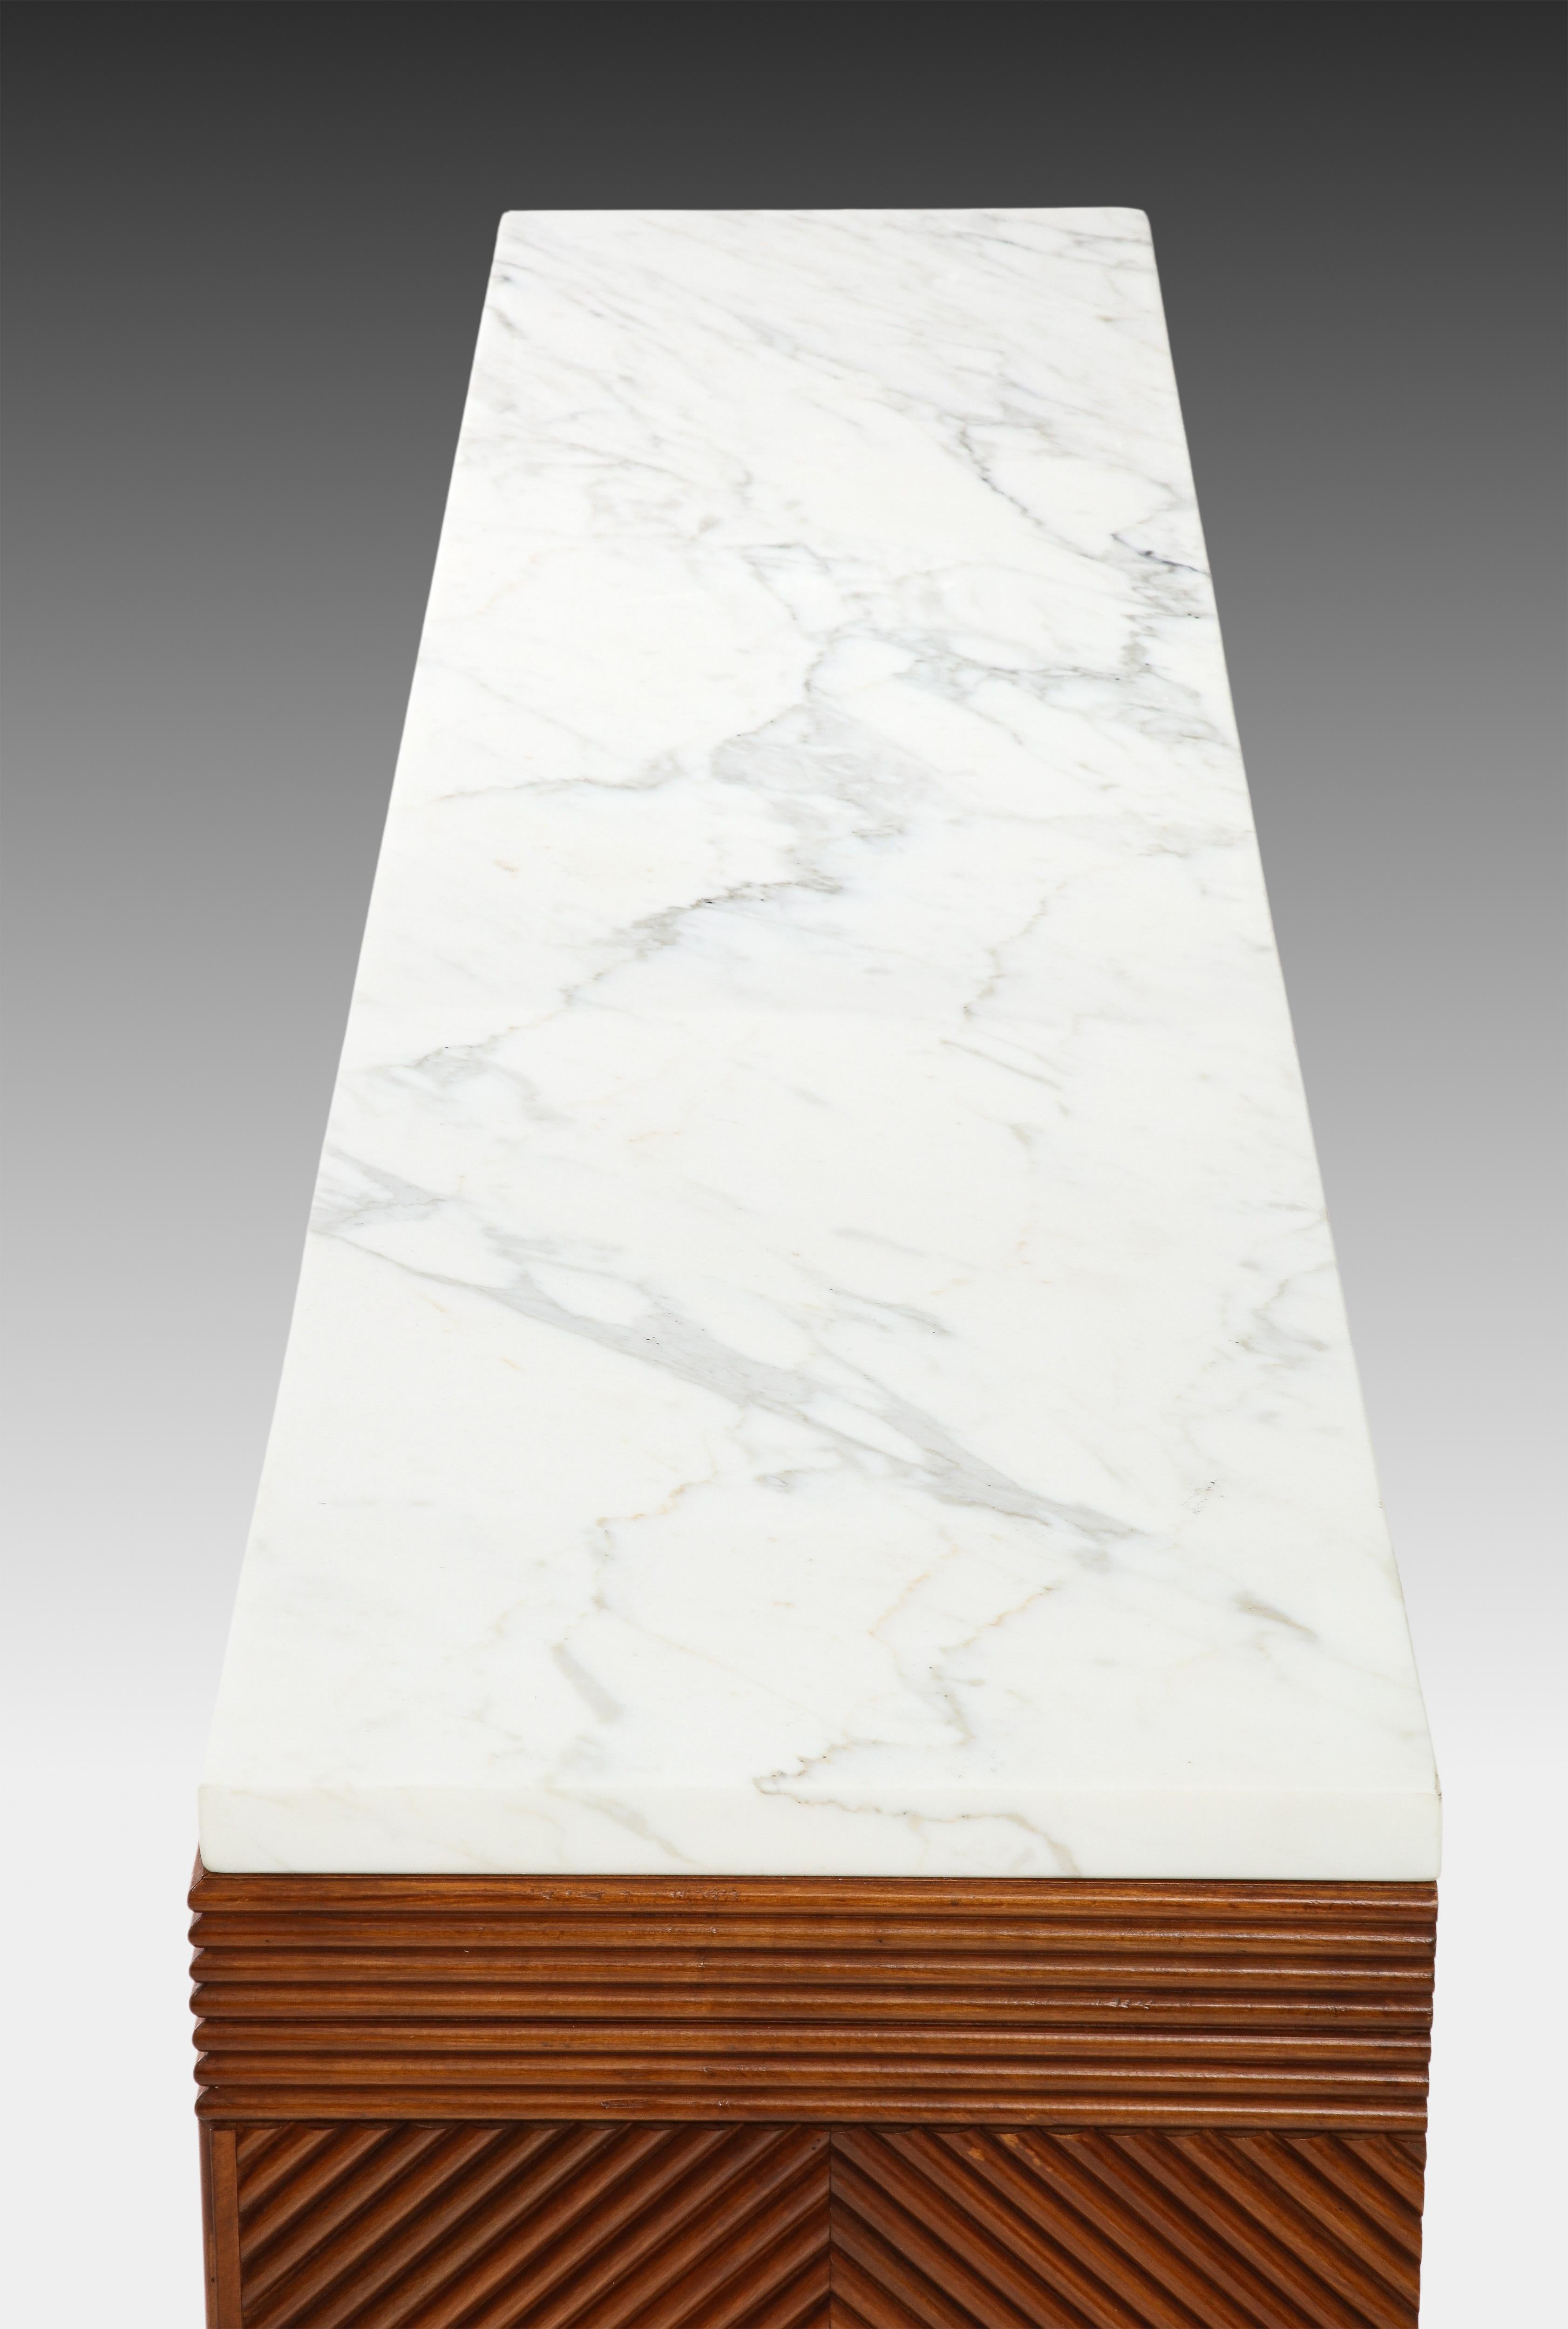 Contemporary Italian Cherry Wood and Carrara Marble Console For Sale 11